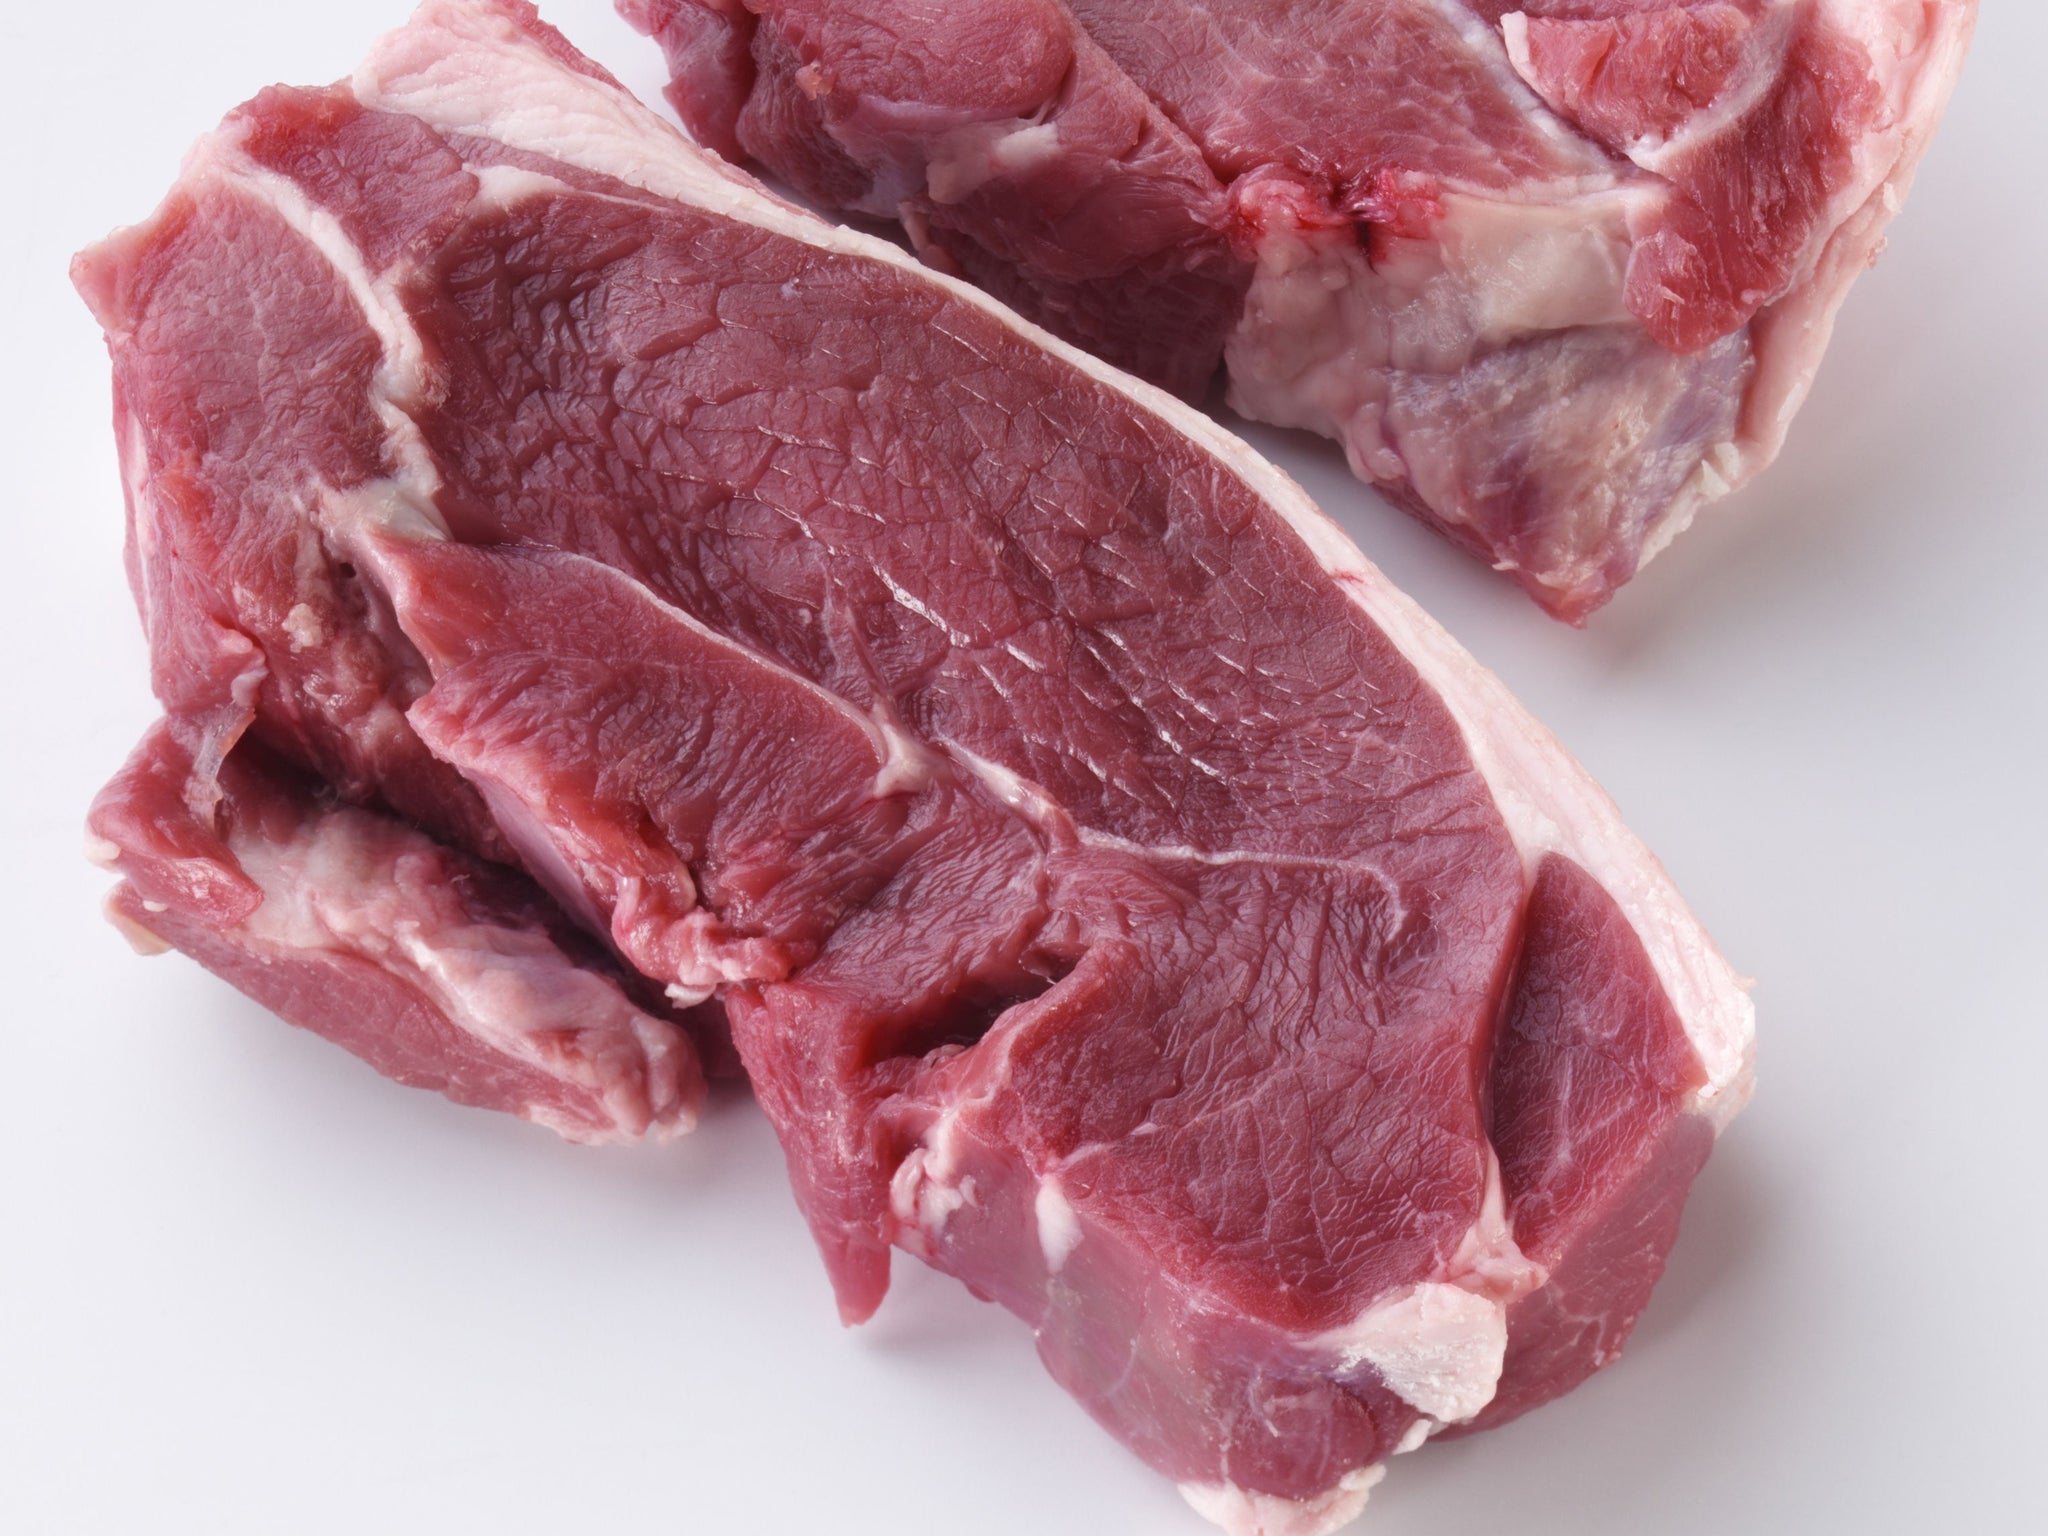 Raising red meat consumption by more than half a serving a day was associated with a 48 per cent increase in risk over the next four years